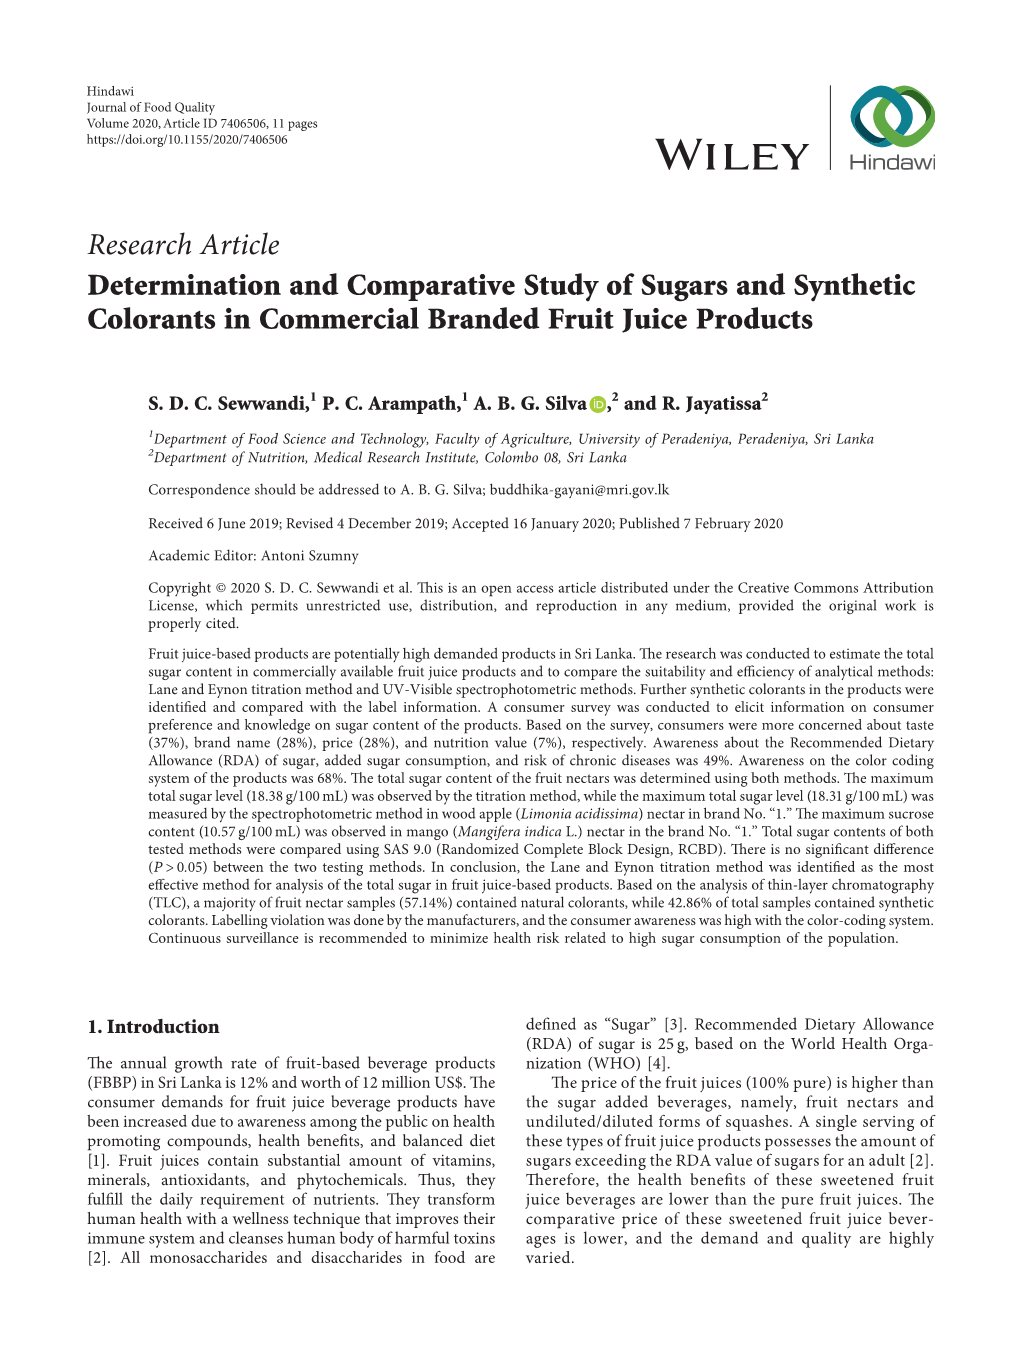 Determination and Comparative Study of Sugars and Synthetic Colorants in Commercial Branded Fruit Juice Products